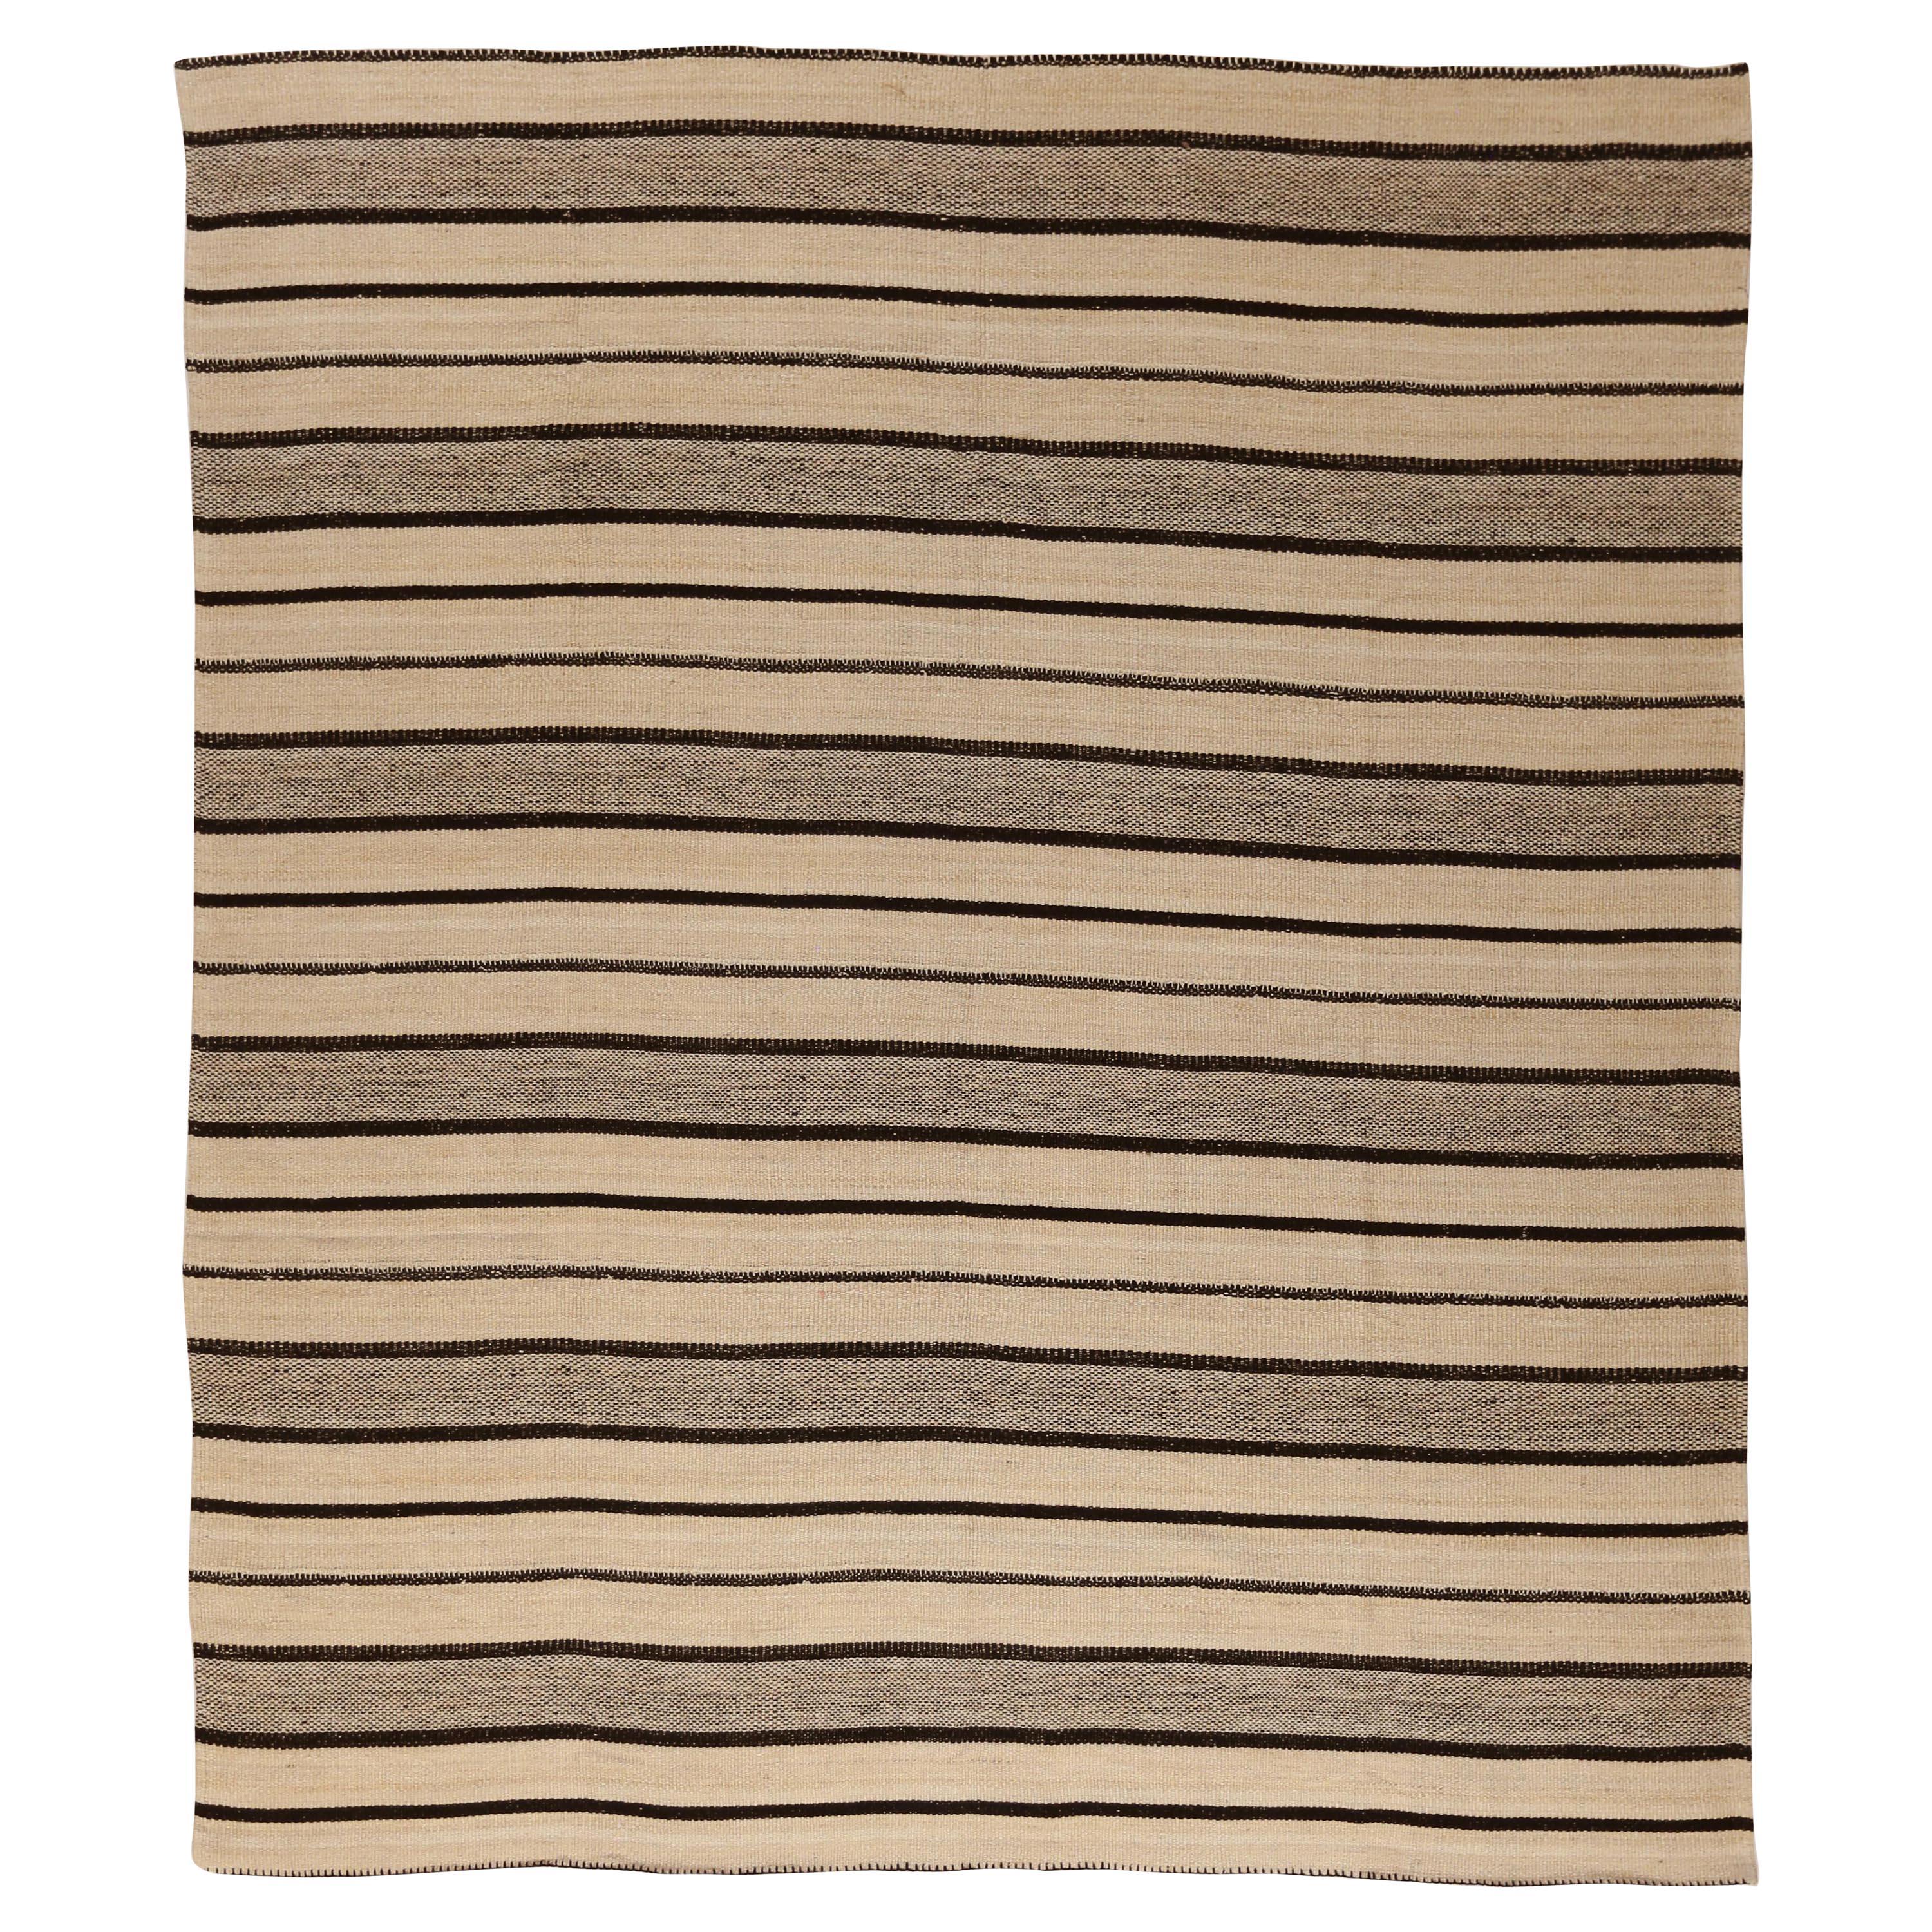 Contemporary Kilim Persian Rug in Beige with Black and Brown Stripes